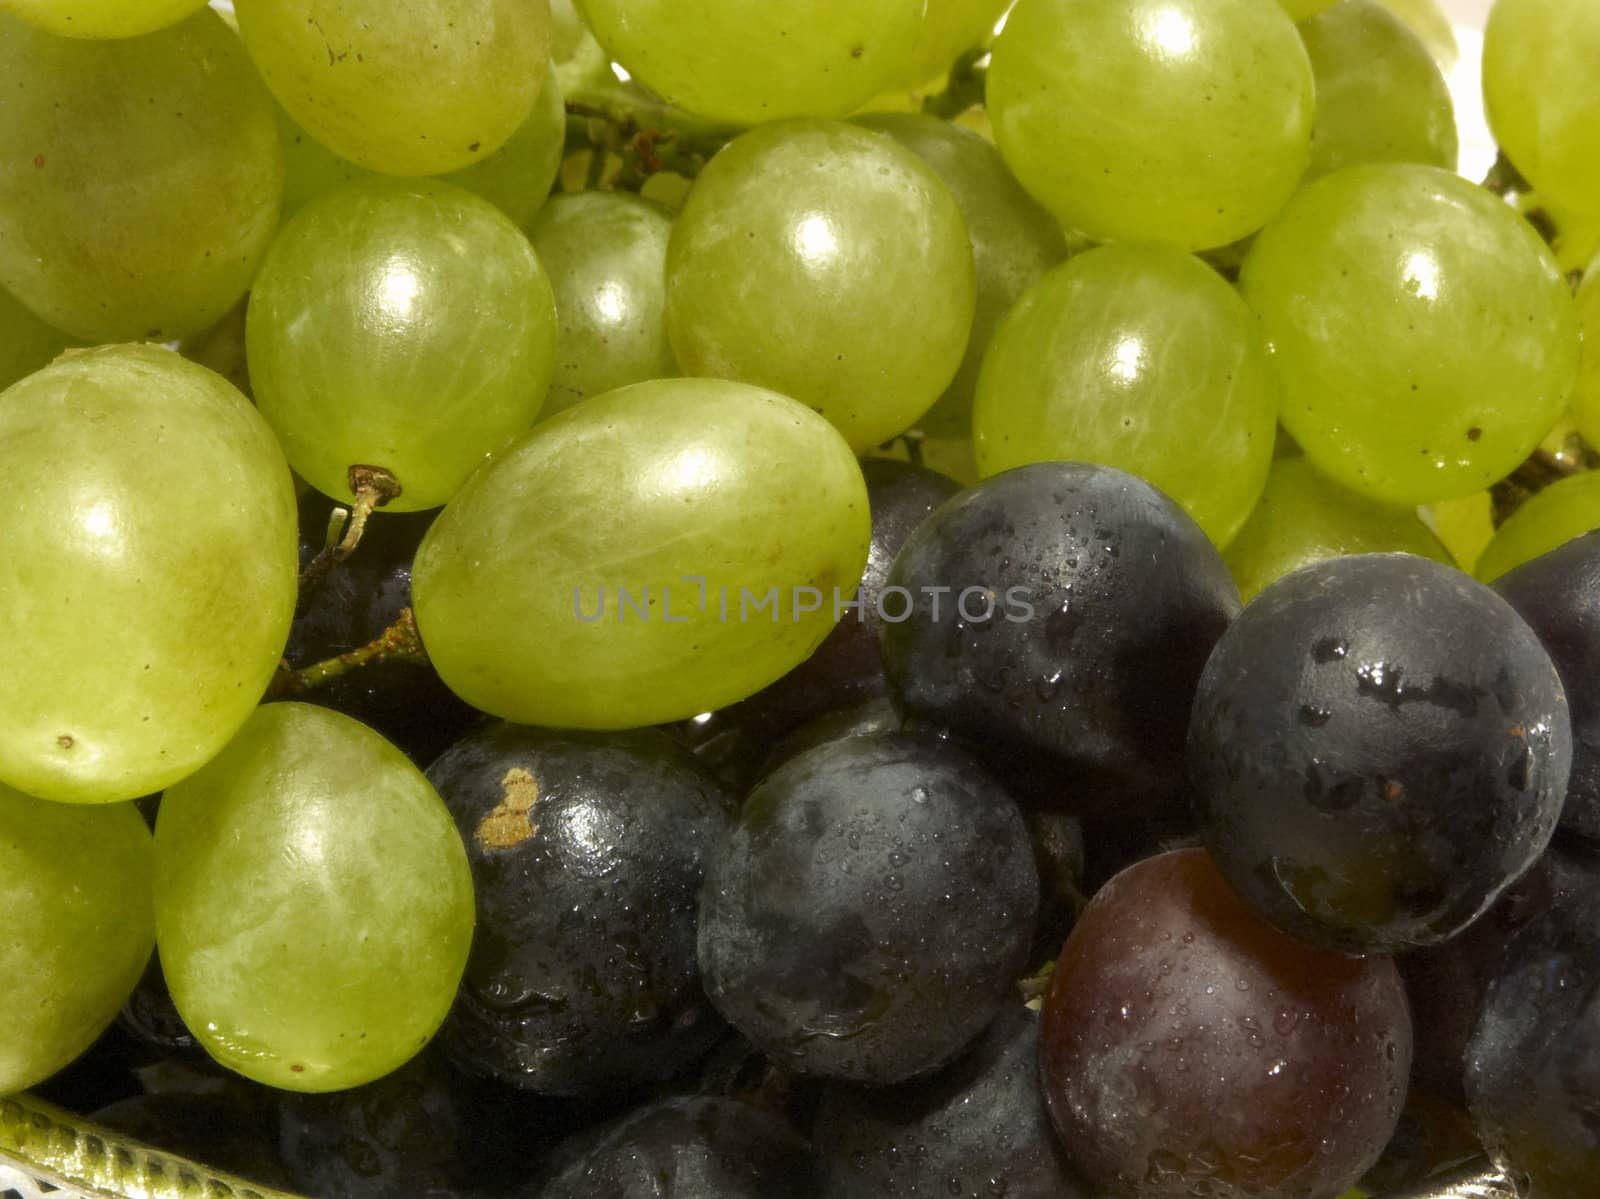 Such different grapes by soloir